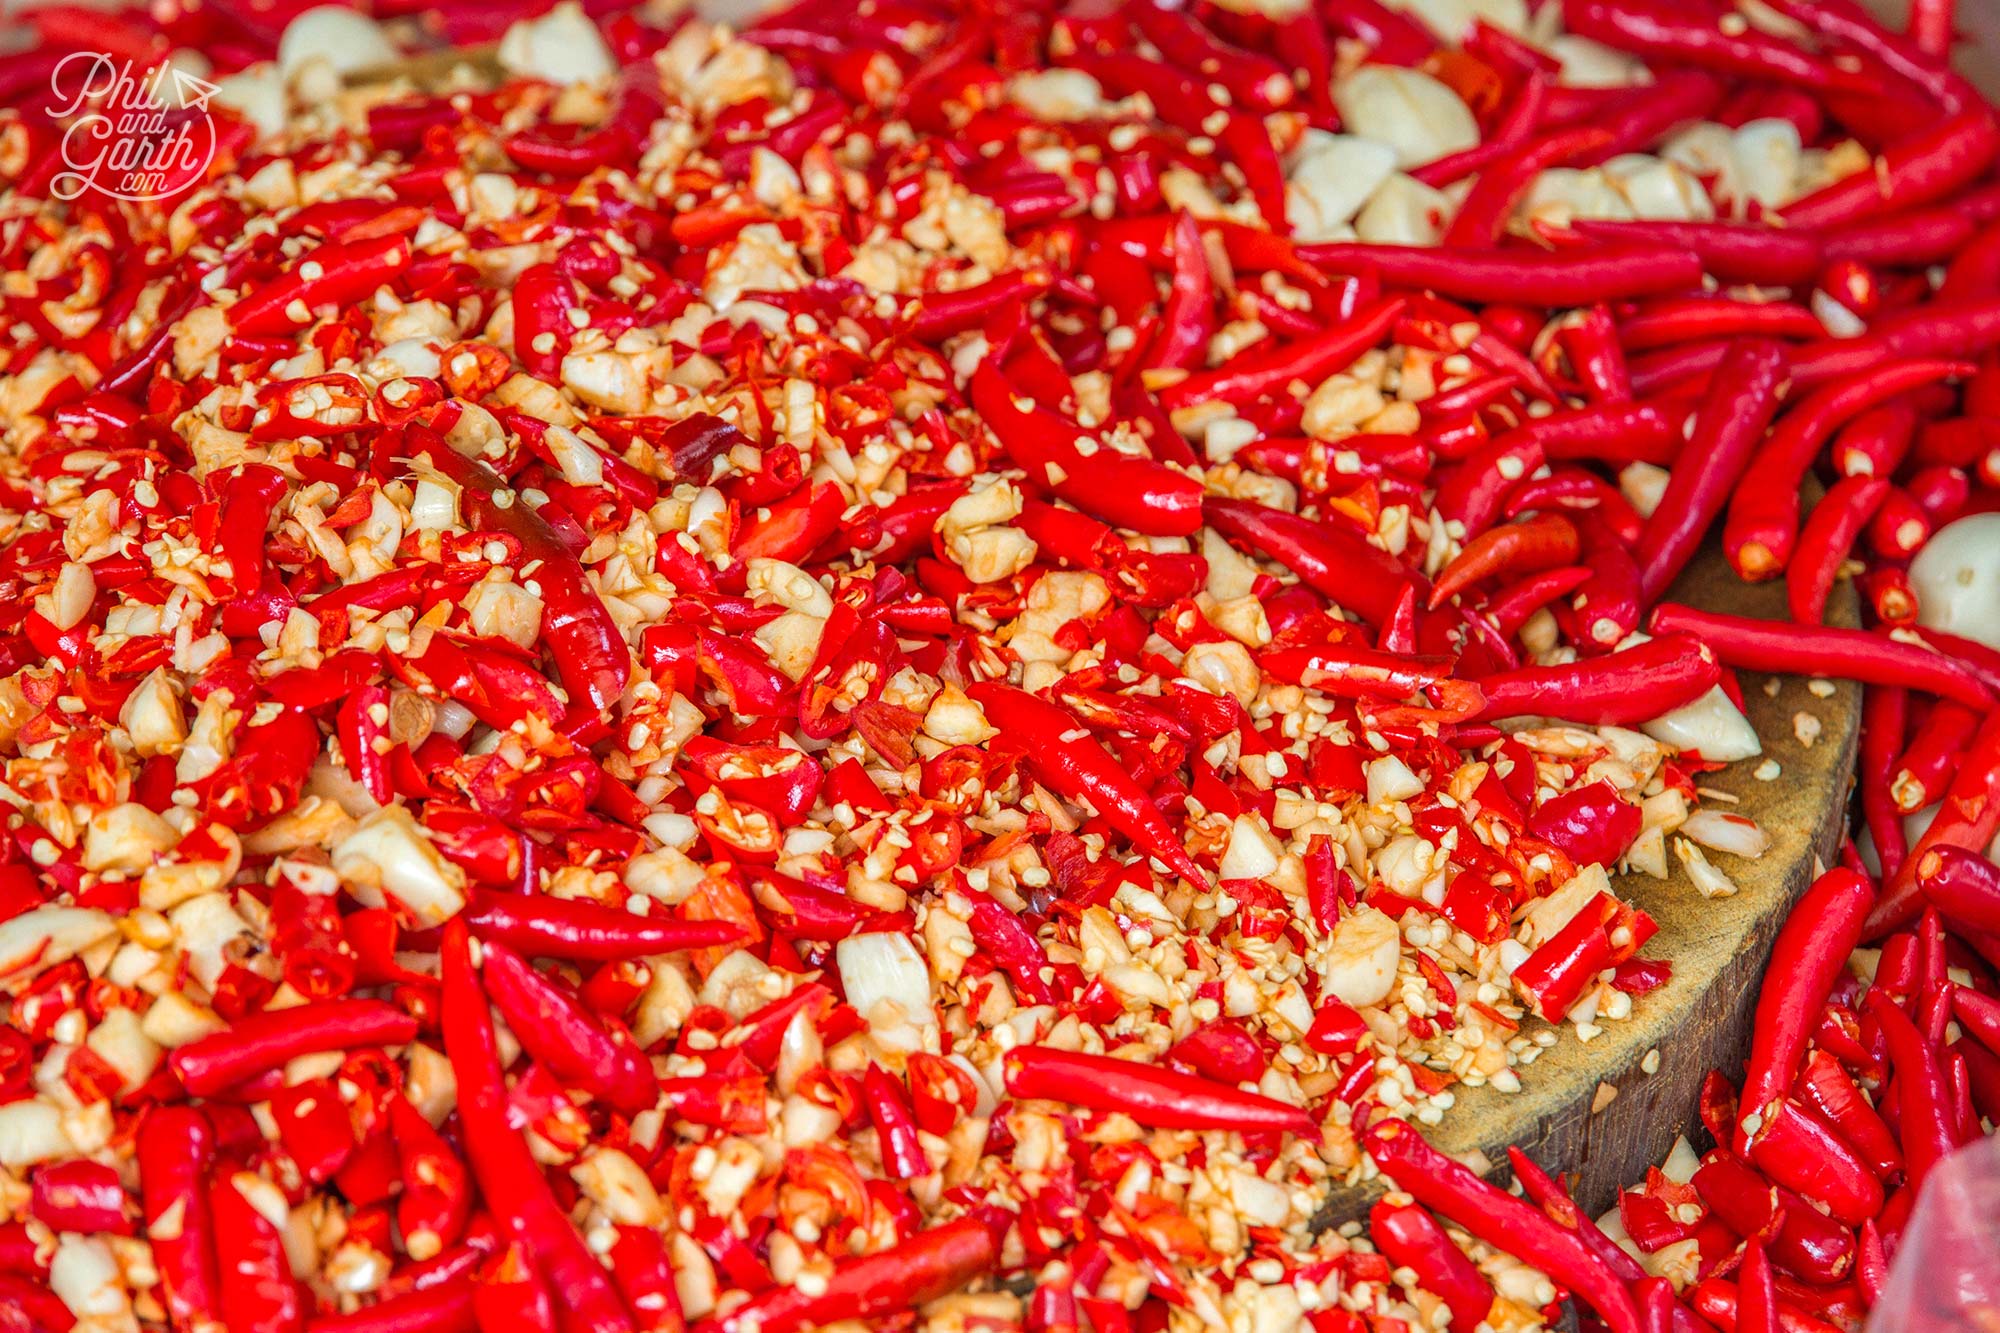 A huge bowl of chilli and garlic for sale!